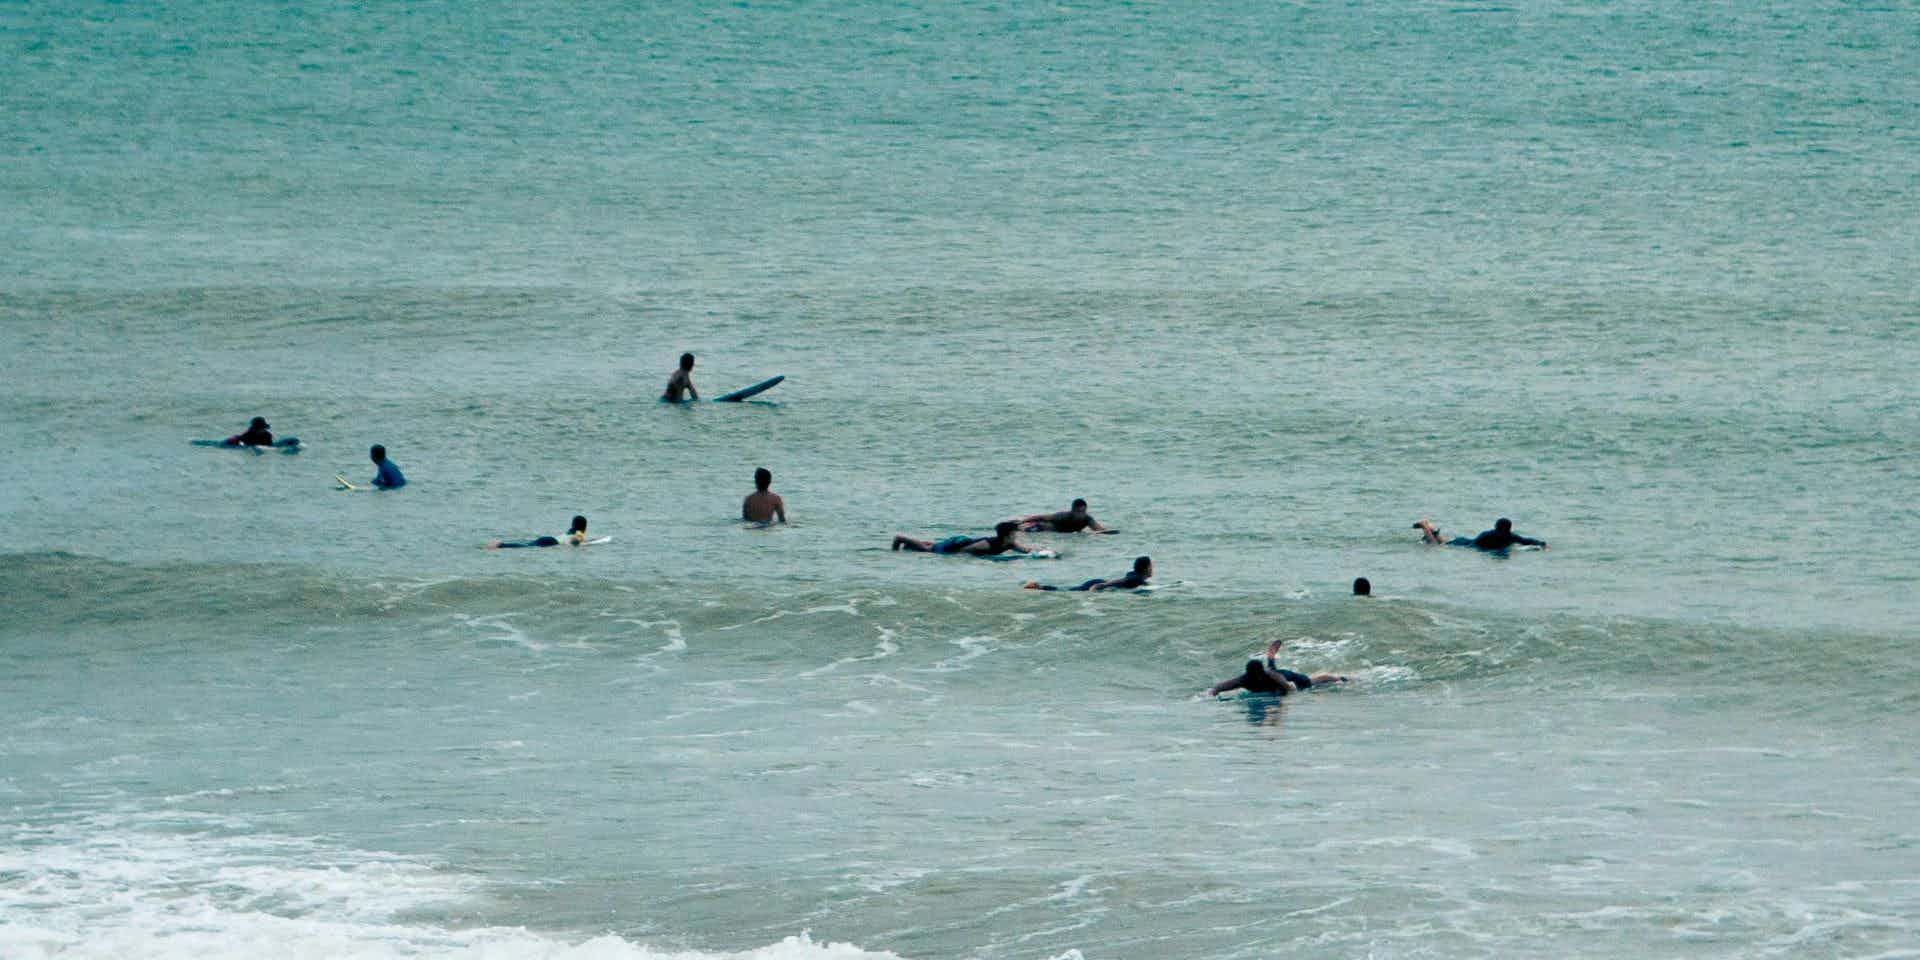 Surfing as a team building activity